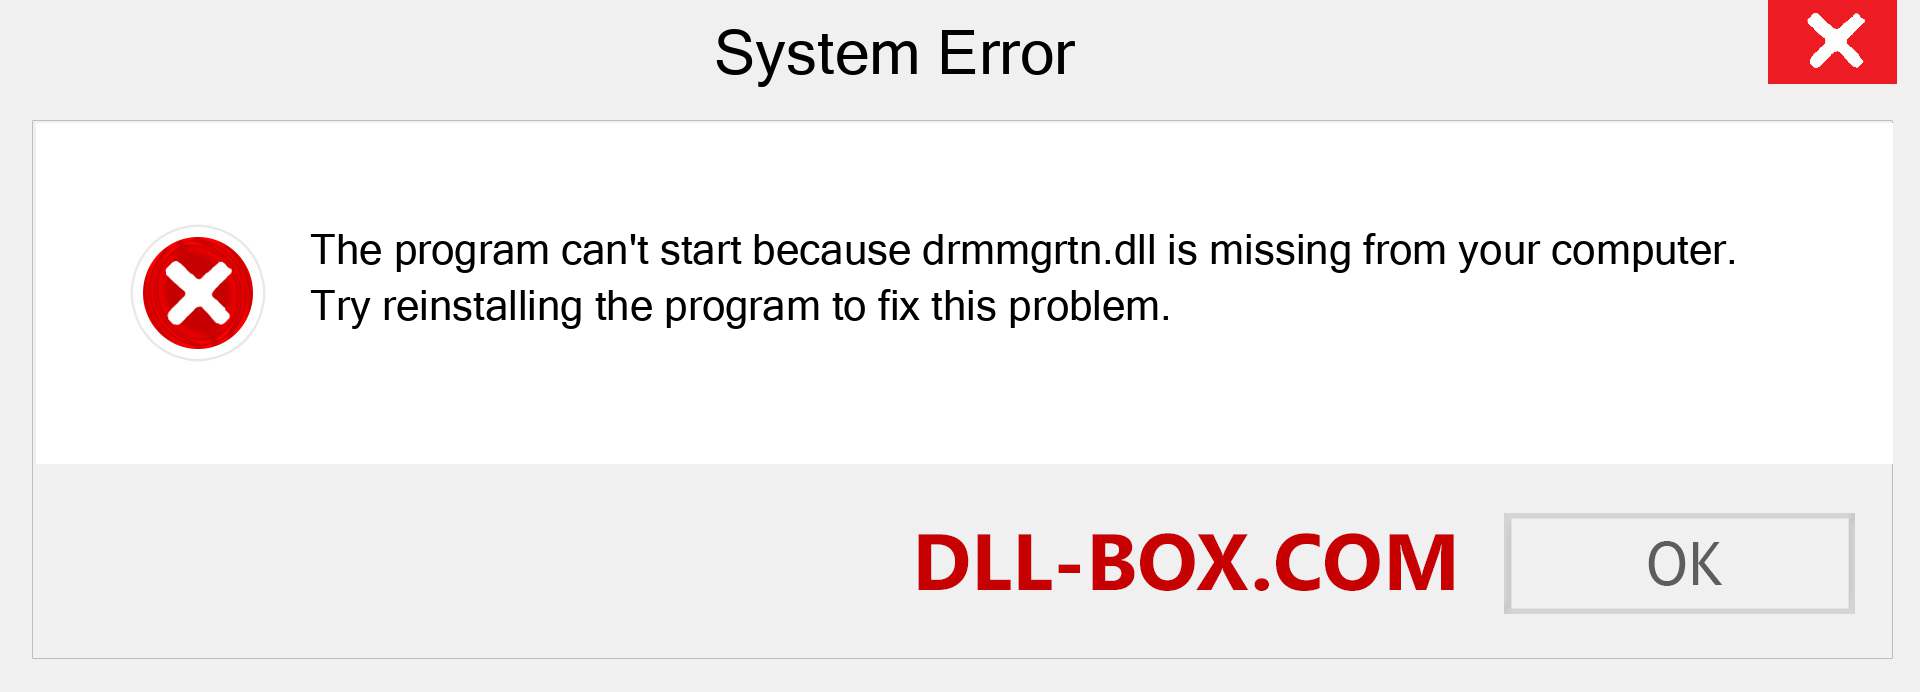  drmmgrtn.dll file is missing?. Download for Windows 7, 8, 10 - Fix  drmmgrtn dll Missing Error on Windows, photos, images